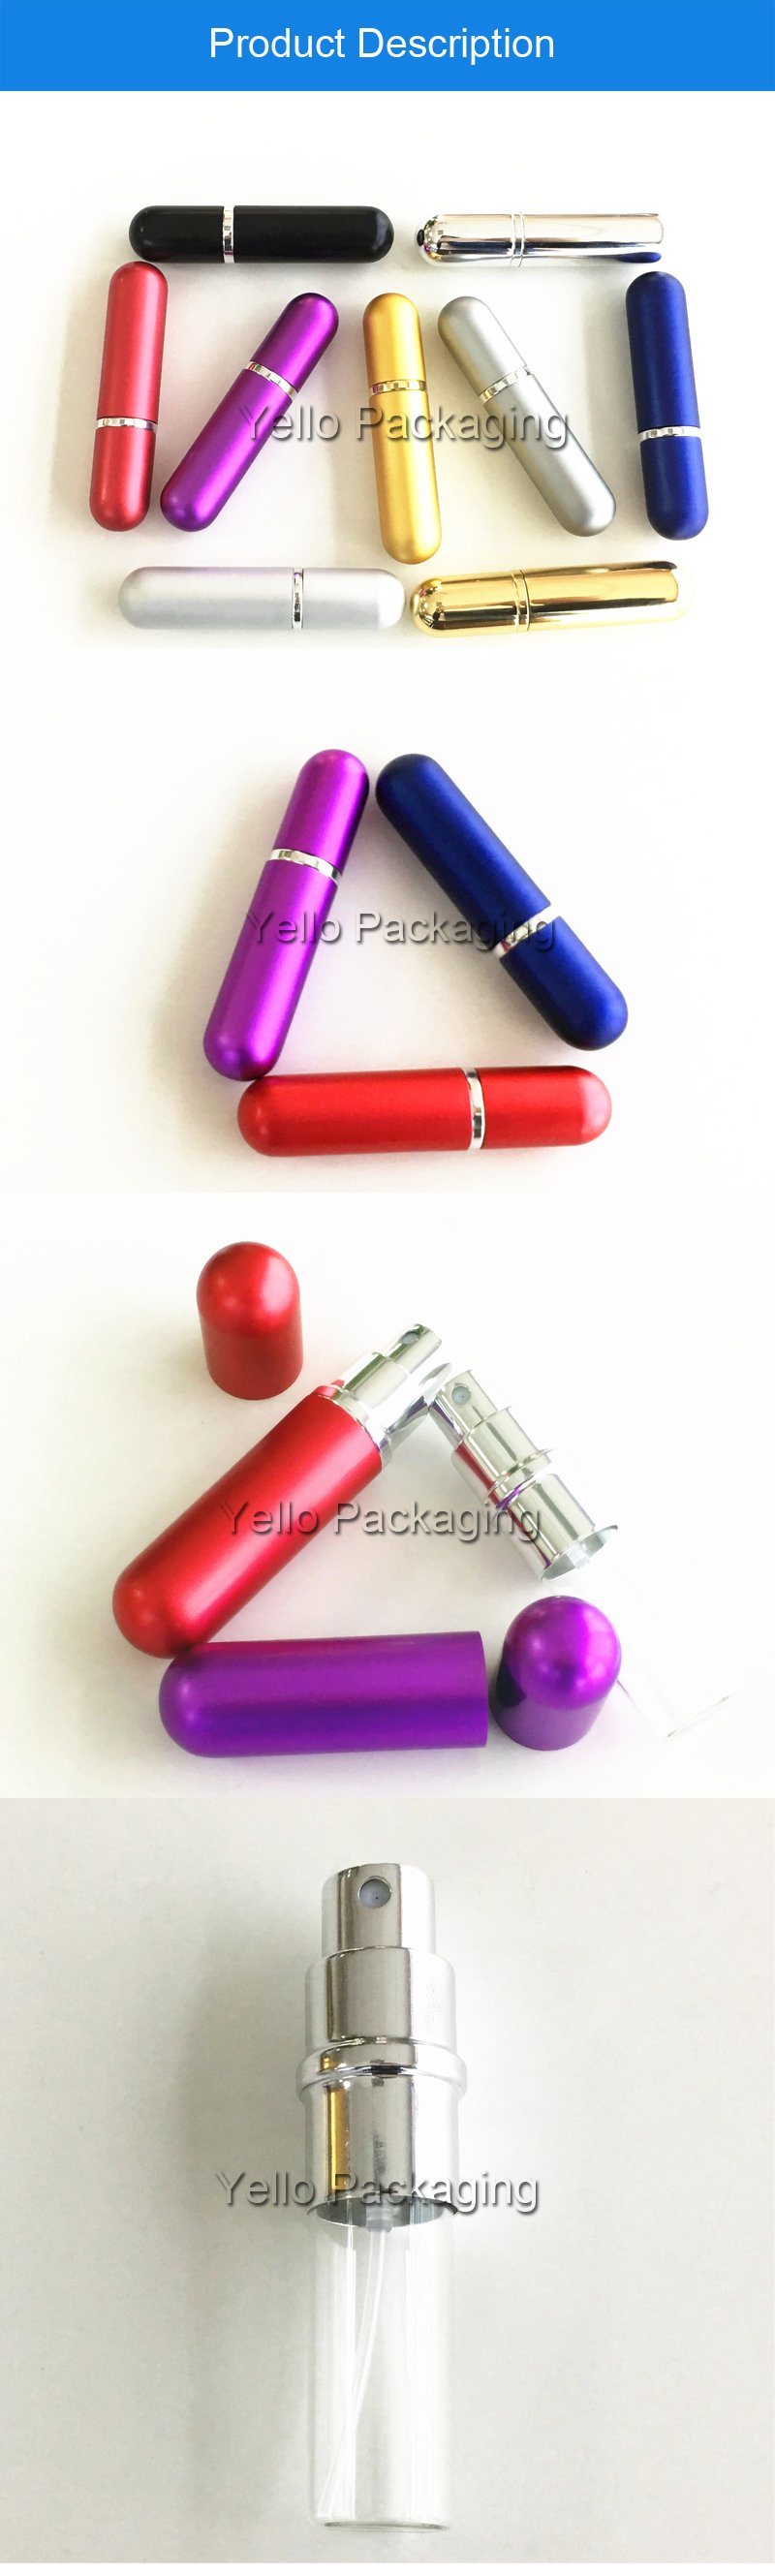 Small Classic Travel Portable Refillable Perfume Atomiser